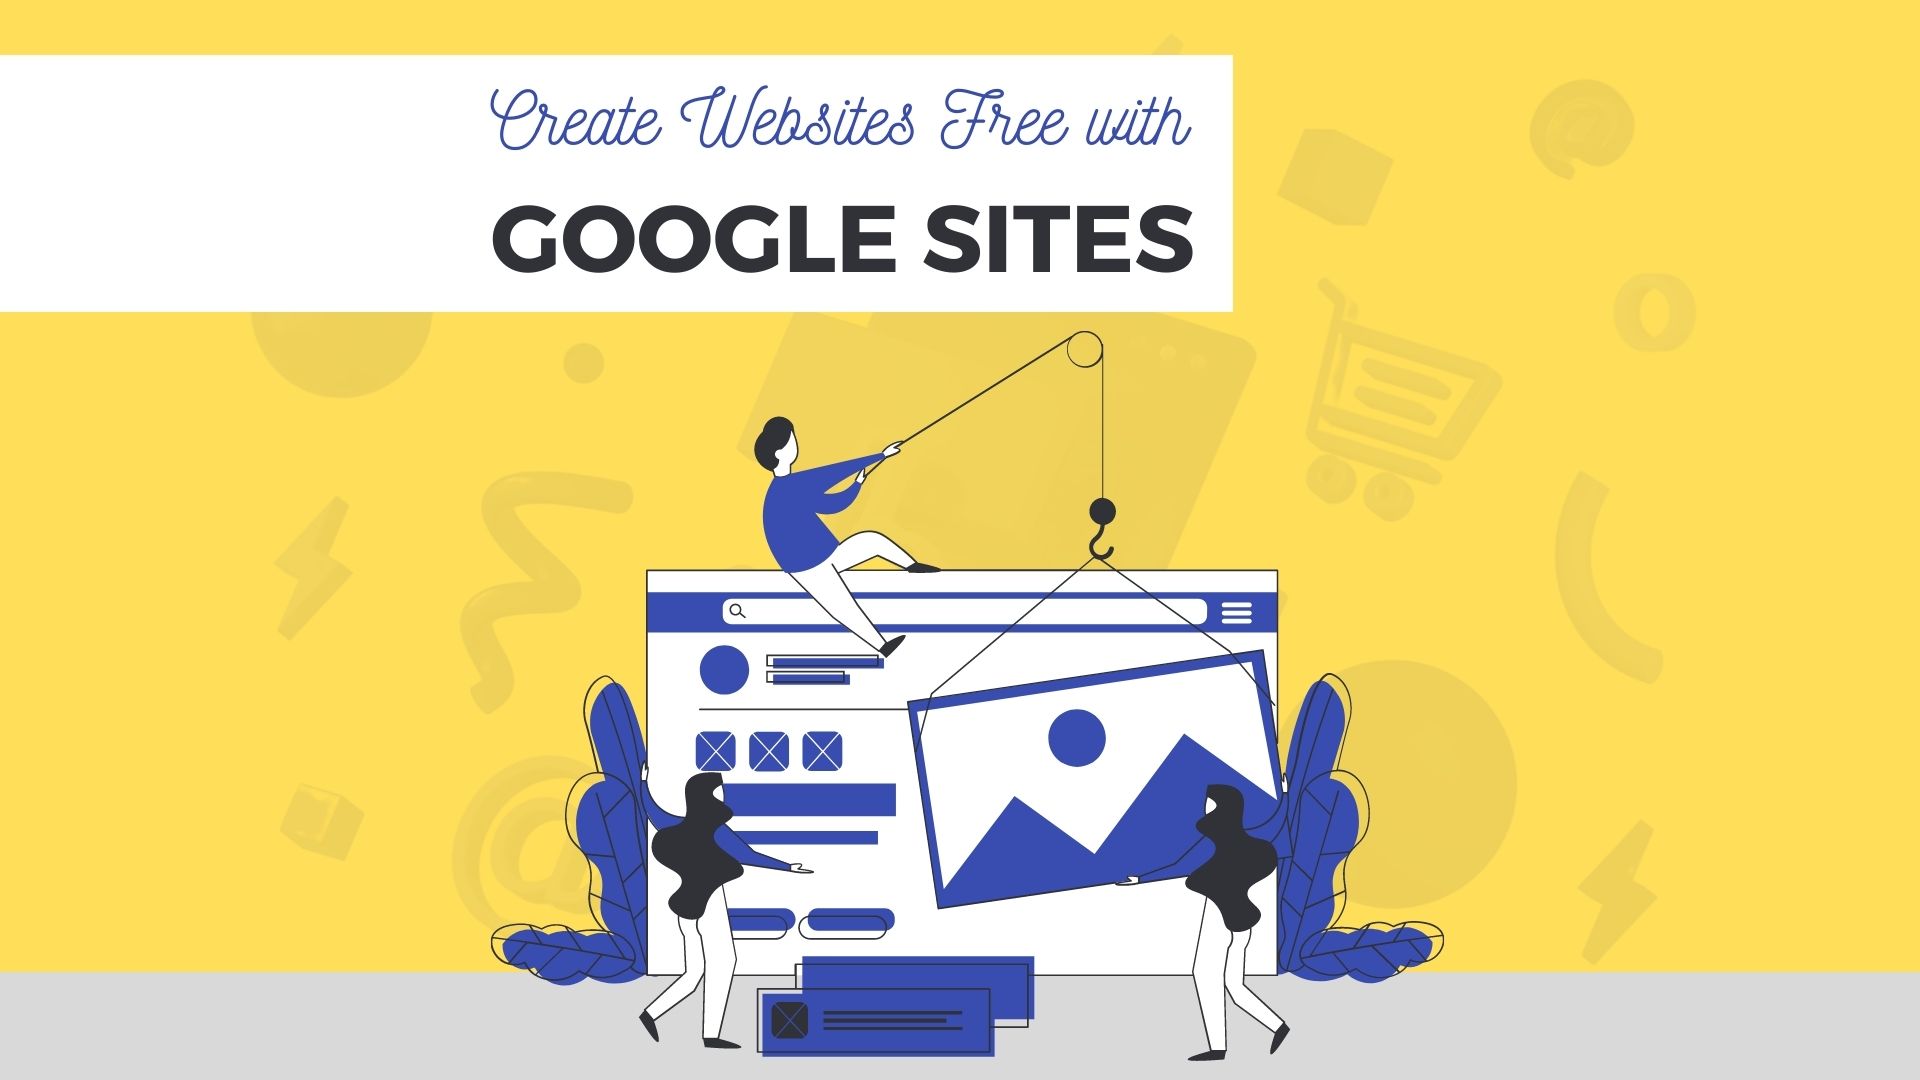 Create Websites Free with Google Sites Course Image